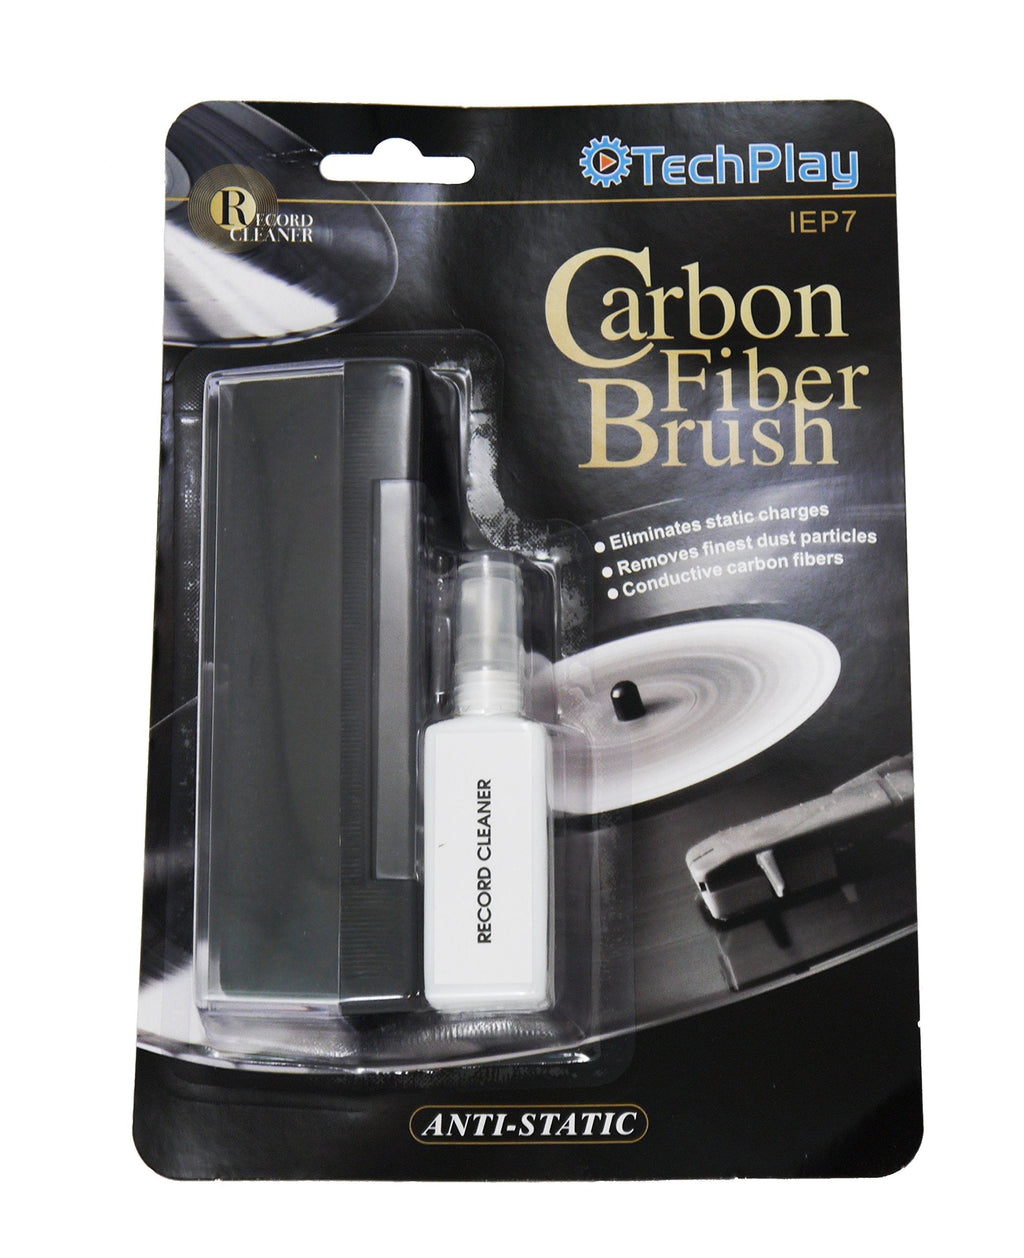 TechPlay Anti Static Carbon Fiber Record and Lp Cleaner and Washer with Stylus Brush and Record Cleaning Liquid Set Black